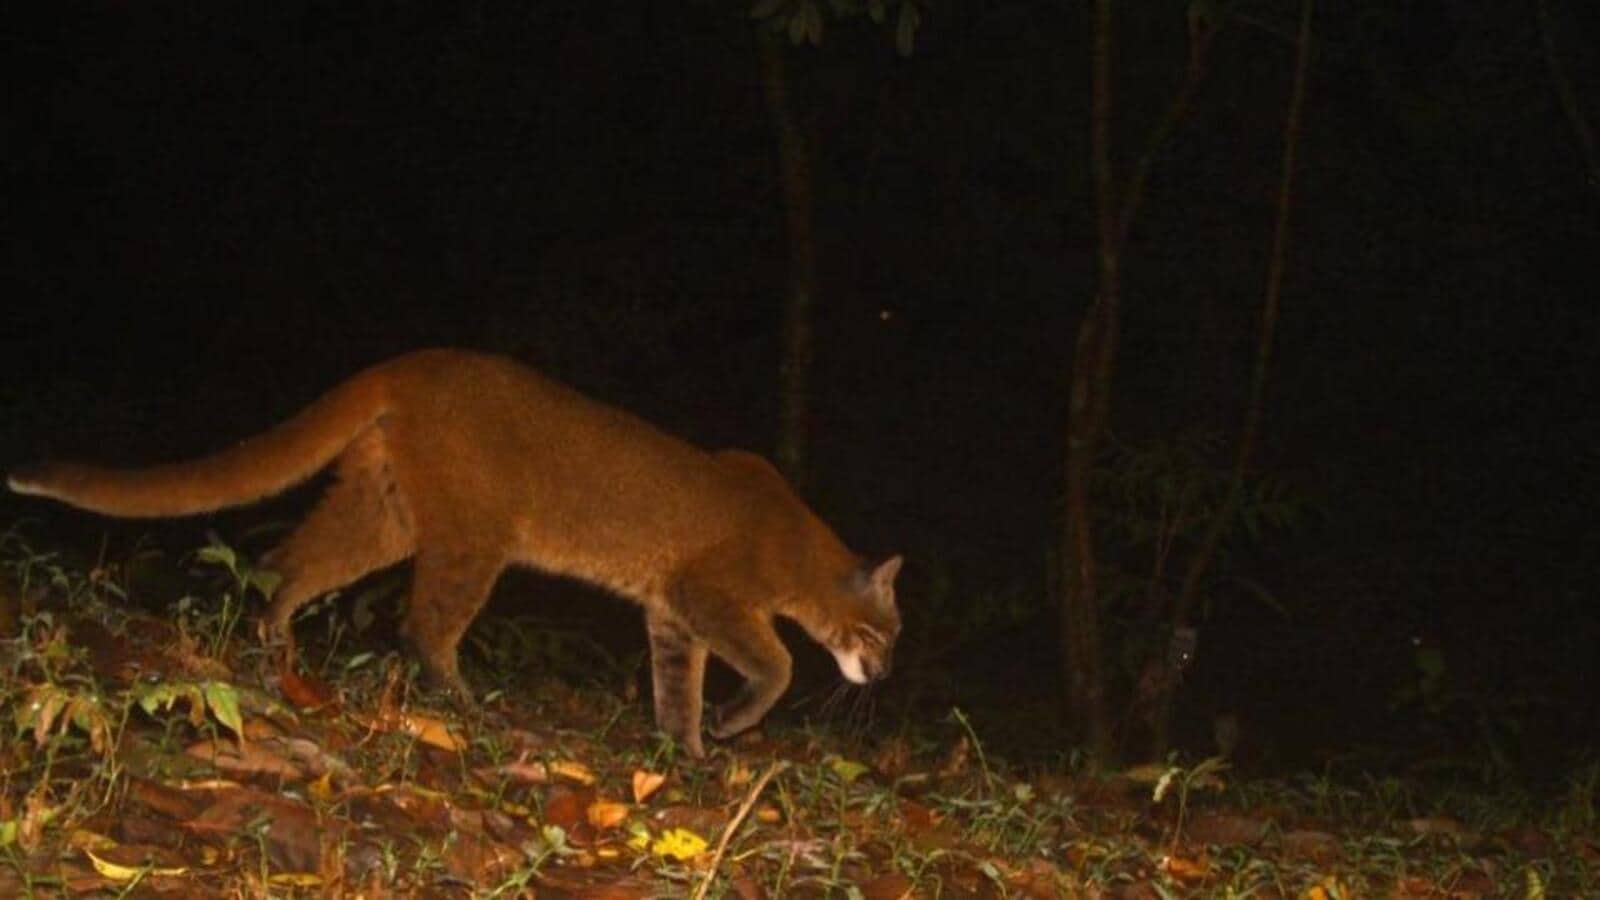 Melanistic Asiatic golden cat captured on camera for first time in West Bengal